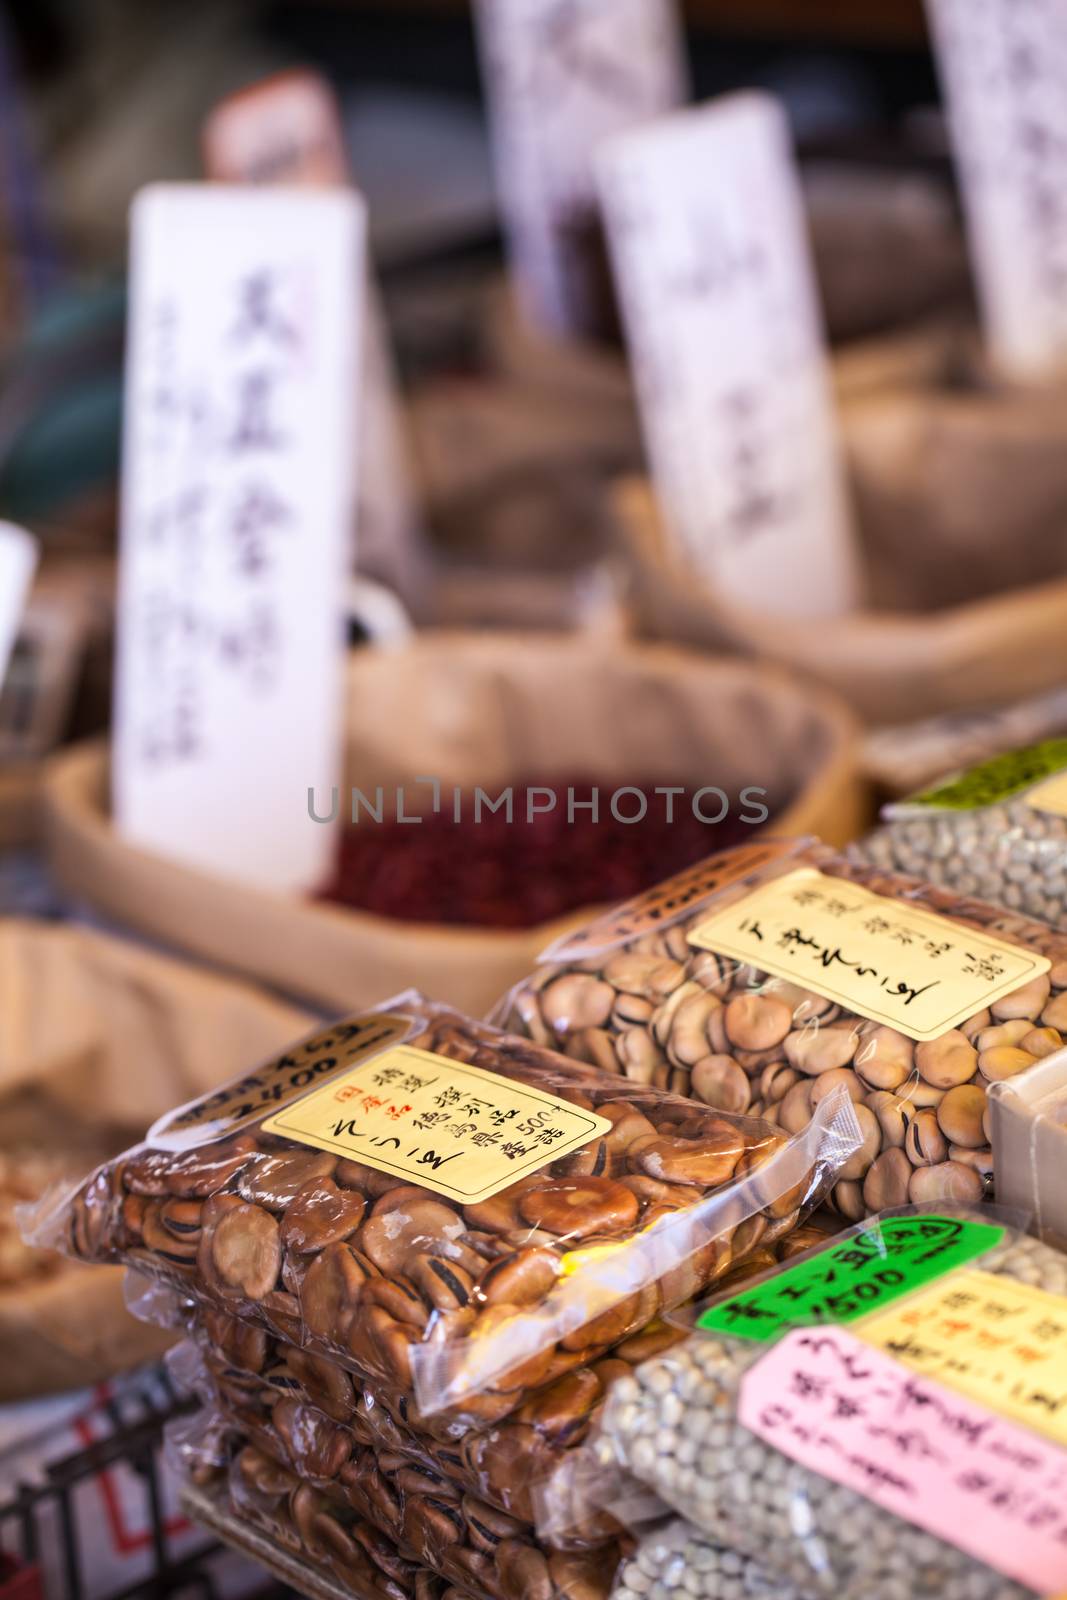 Exotic foods on display in traditional market in Japan.